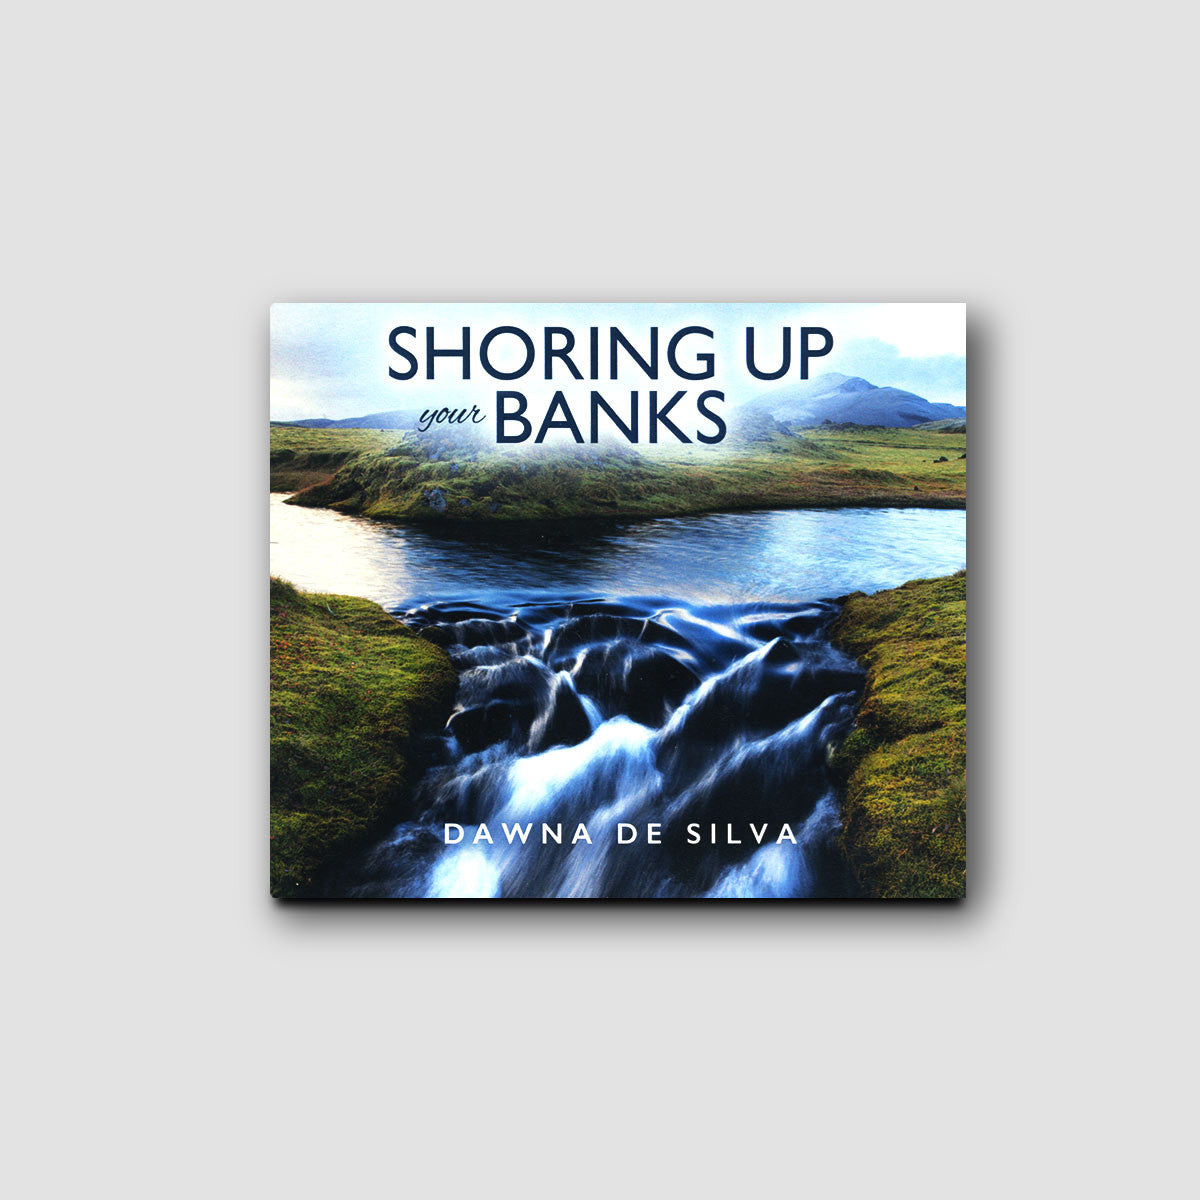 Shoring Up Your Banks